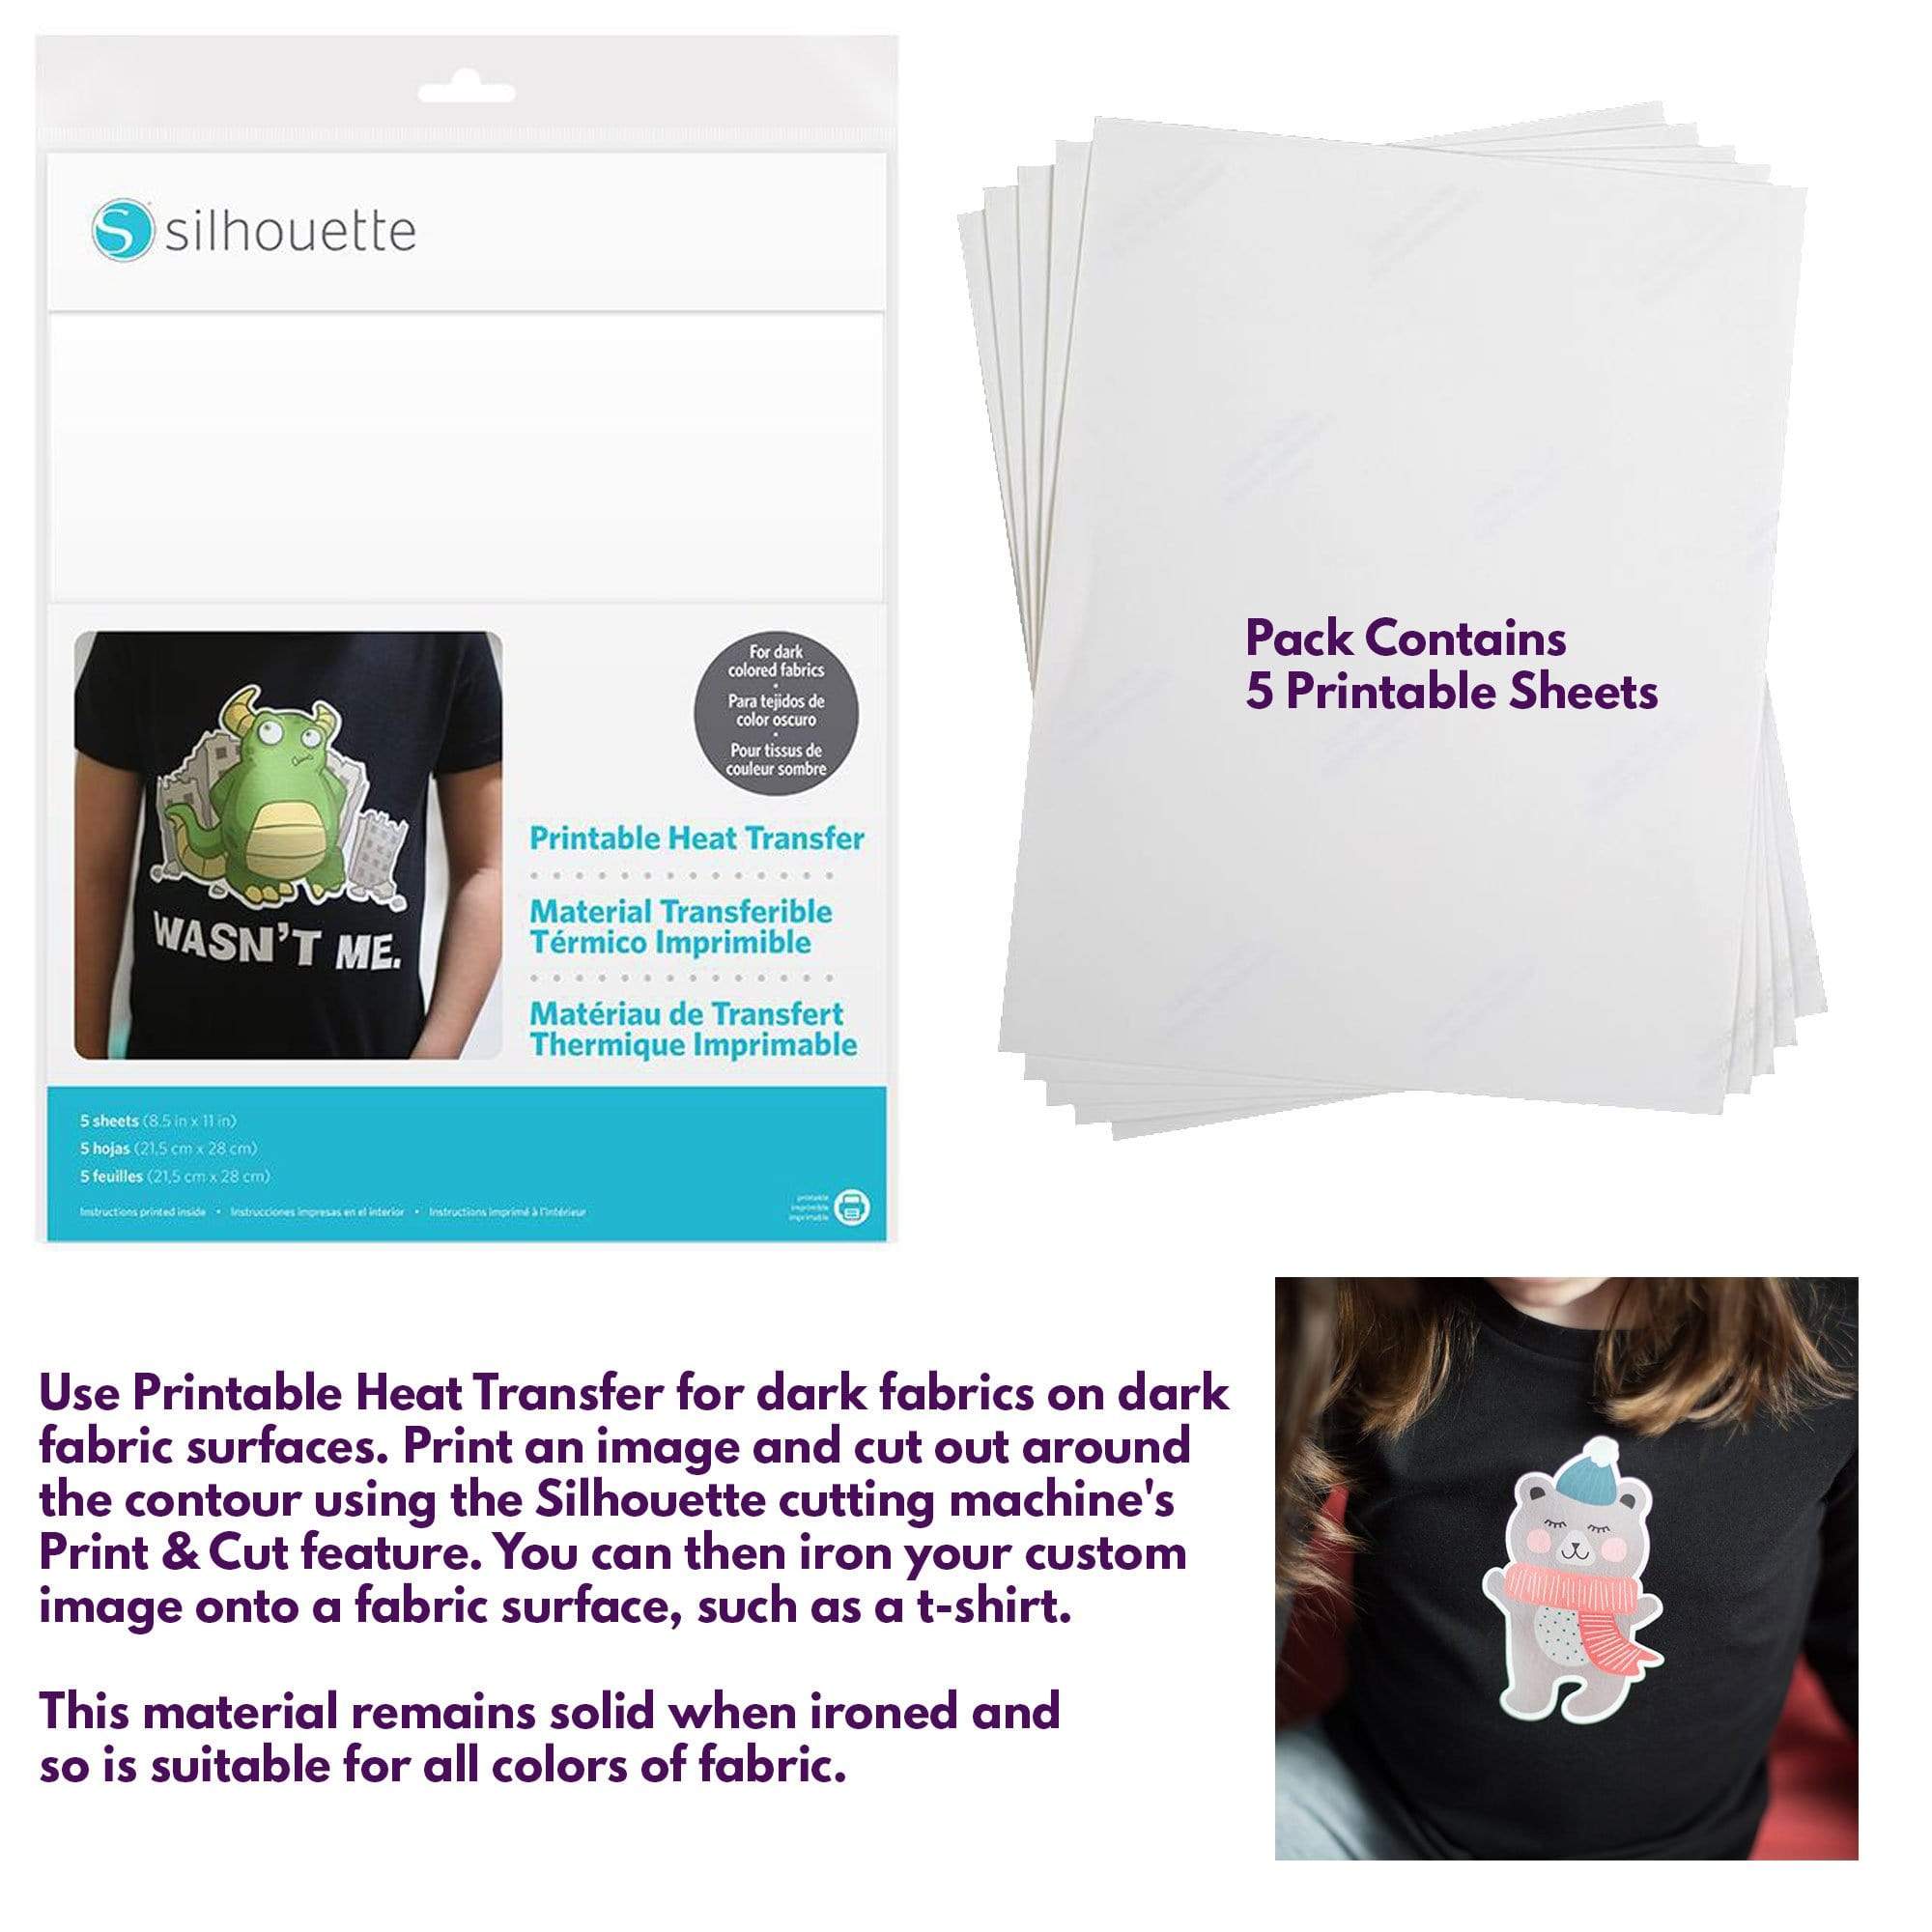 Silhouette America Craft Cutters Silhouette Cameo 4 Pink Bundle with Pixscan Mat, Heat Transfer Starter Kit, 12 Sheets of Printable Heat Transfer Material, PixScan Mat, CrafterCuts Vinyl Tool Kit, 120 Exclusive Designs, and Access to Ebooks, Tutorials, classes.